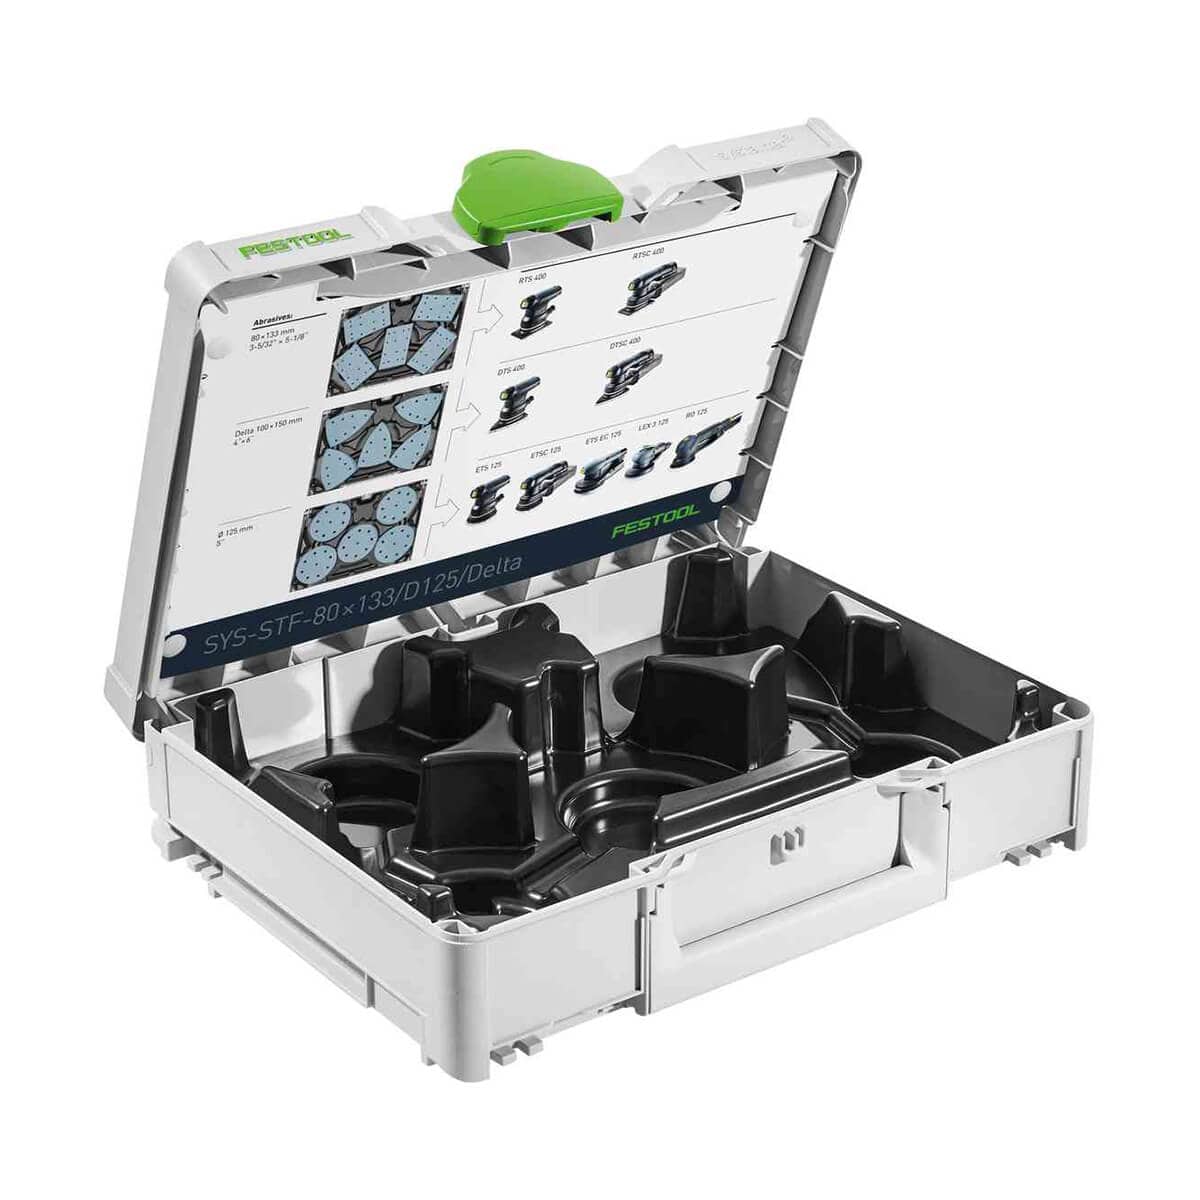 Festool 576781 Systainer Systainer³ SYS-STF-80x133/D125/Delta